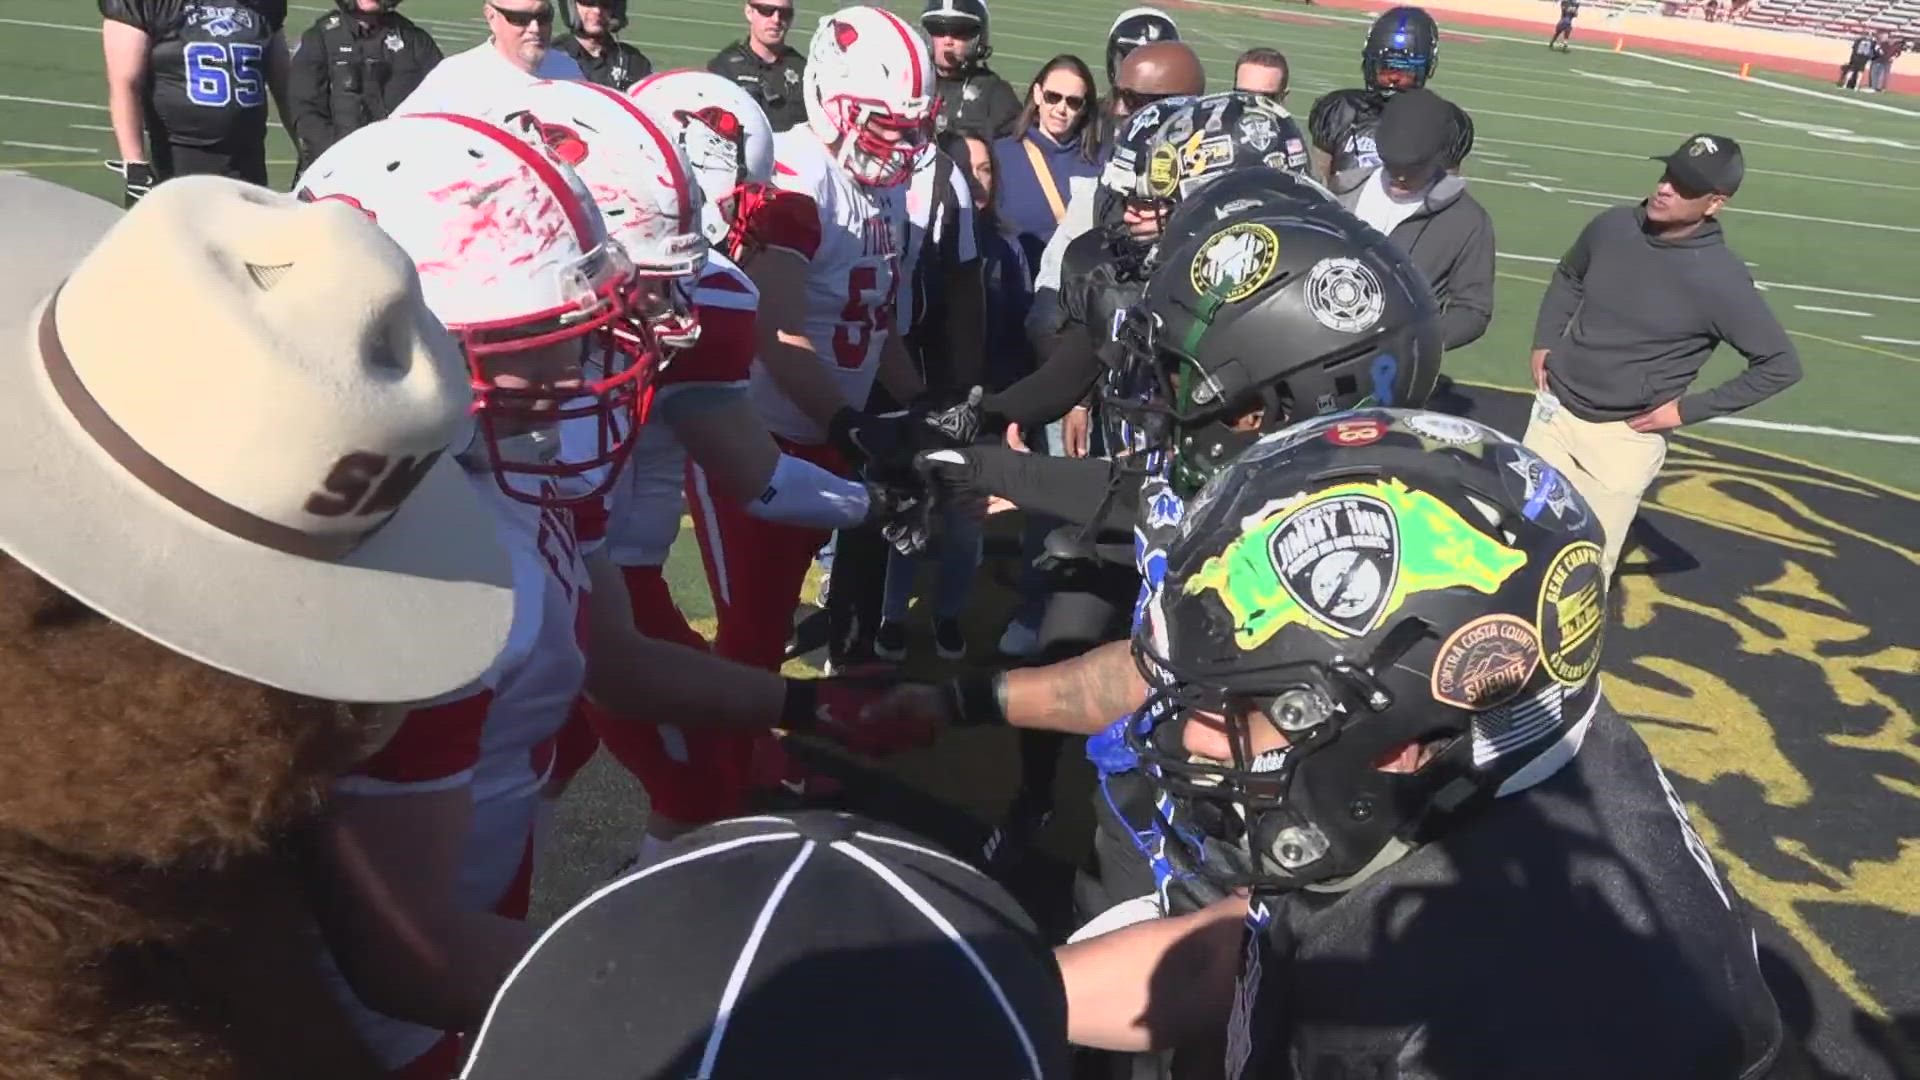 Thousands of fans attended the 49th Annual Pig Bowl game, where Sacramento Area firefighters faced off against Sacramento Area law enforcement in the charity game.